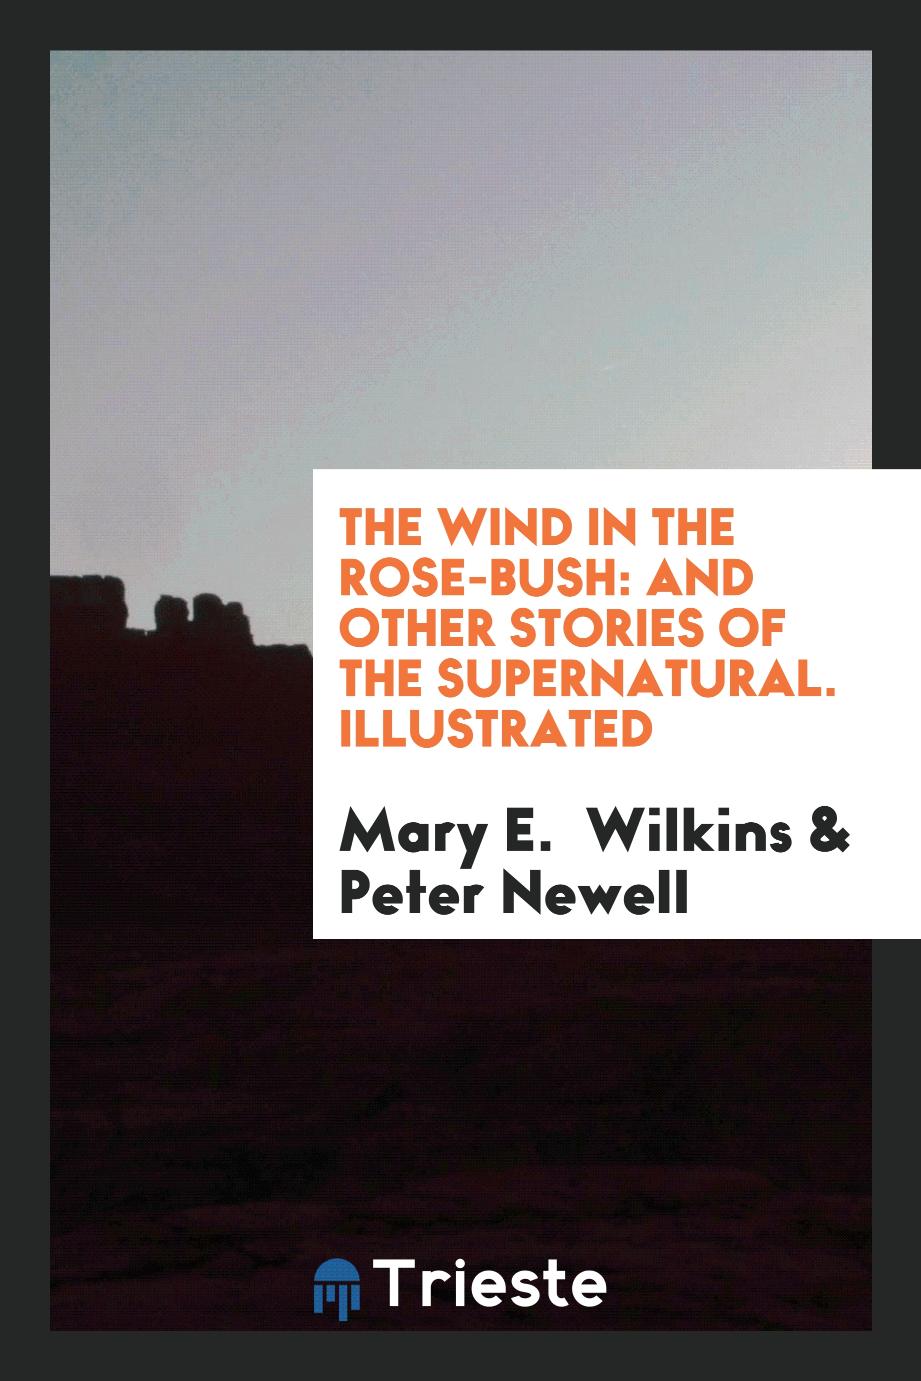 The Wind in the Rose-Bush: And Other Stories of the Supernatural. Illustrated